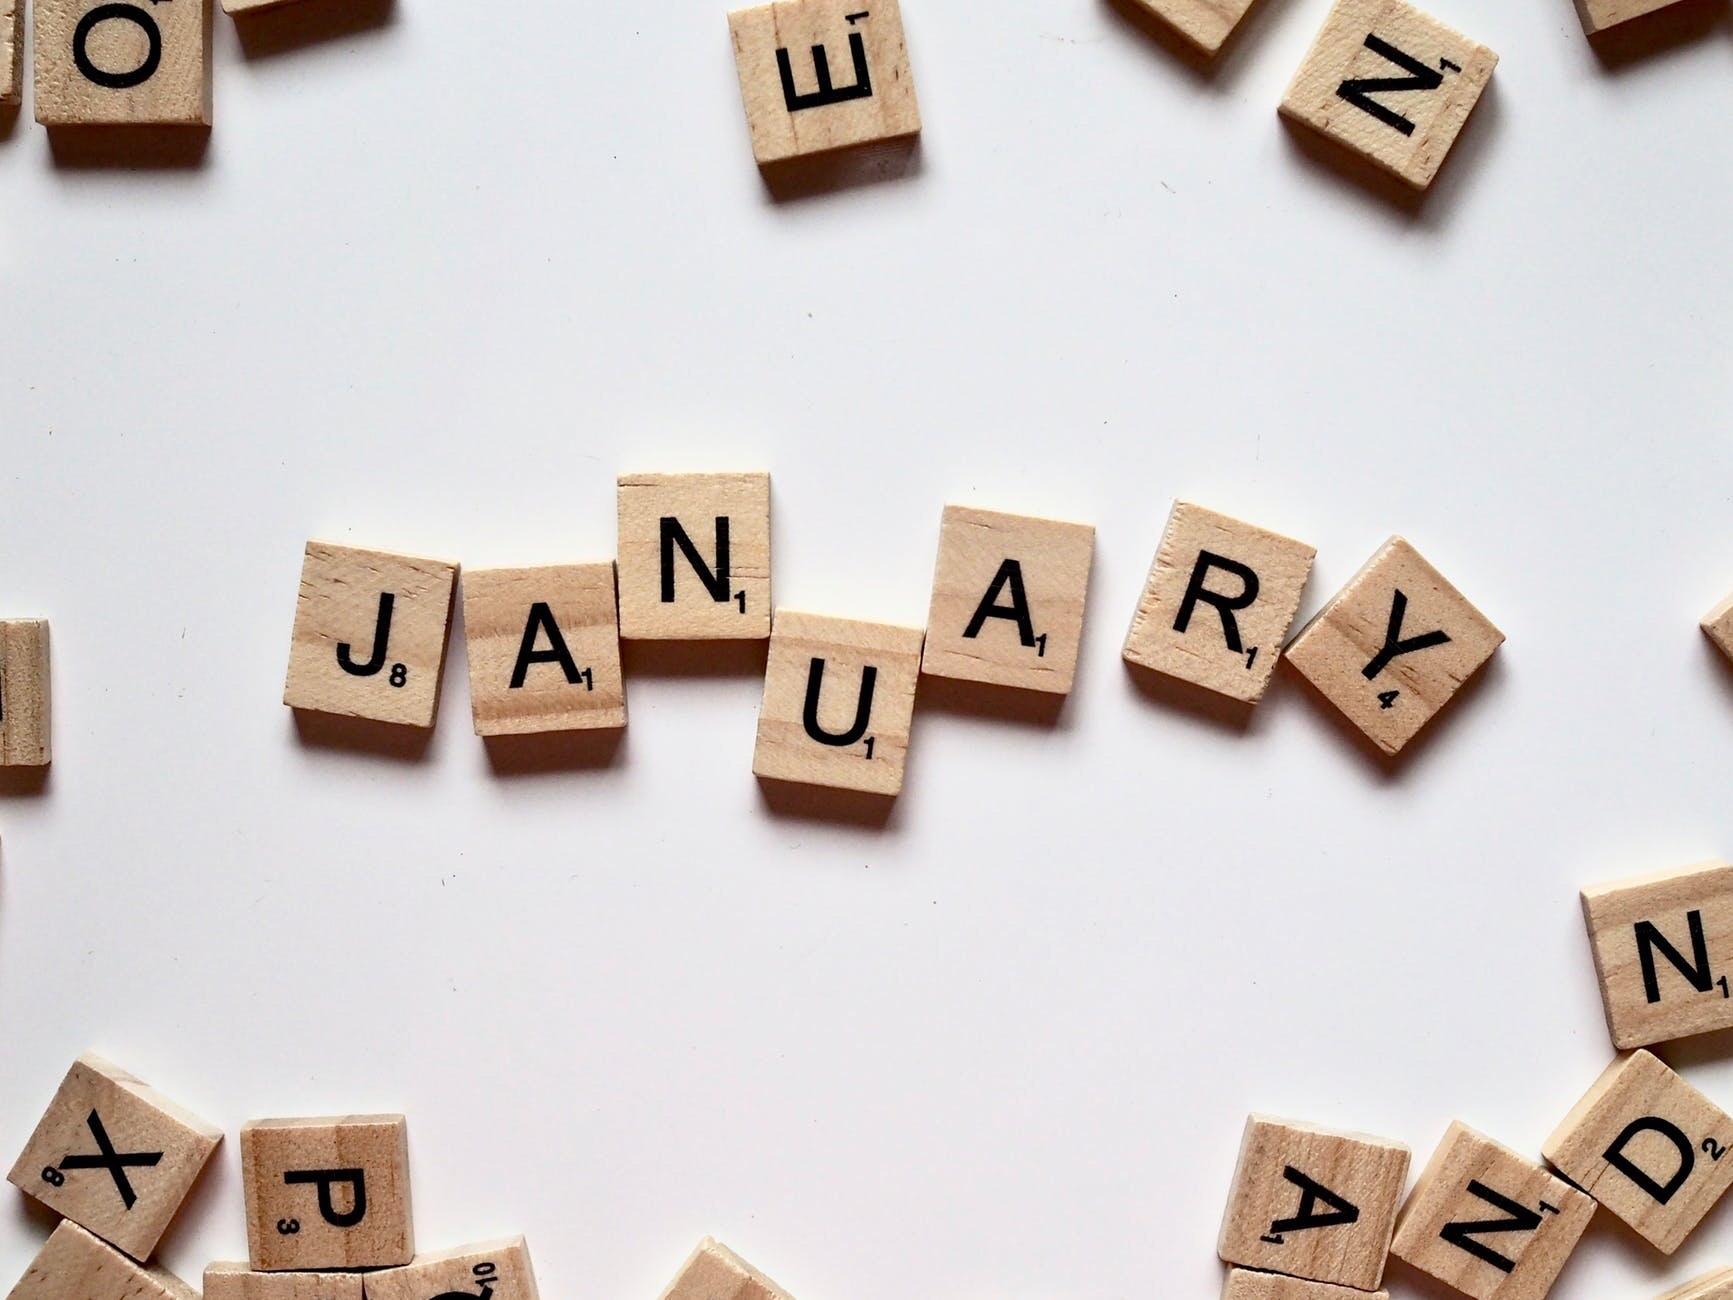 Get to know the month of January - January may be best known for resolutions, new beginnings and snowy weather. But there's plenty of other trivia tidbits that make the first month of the year stand out. #January